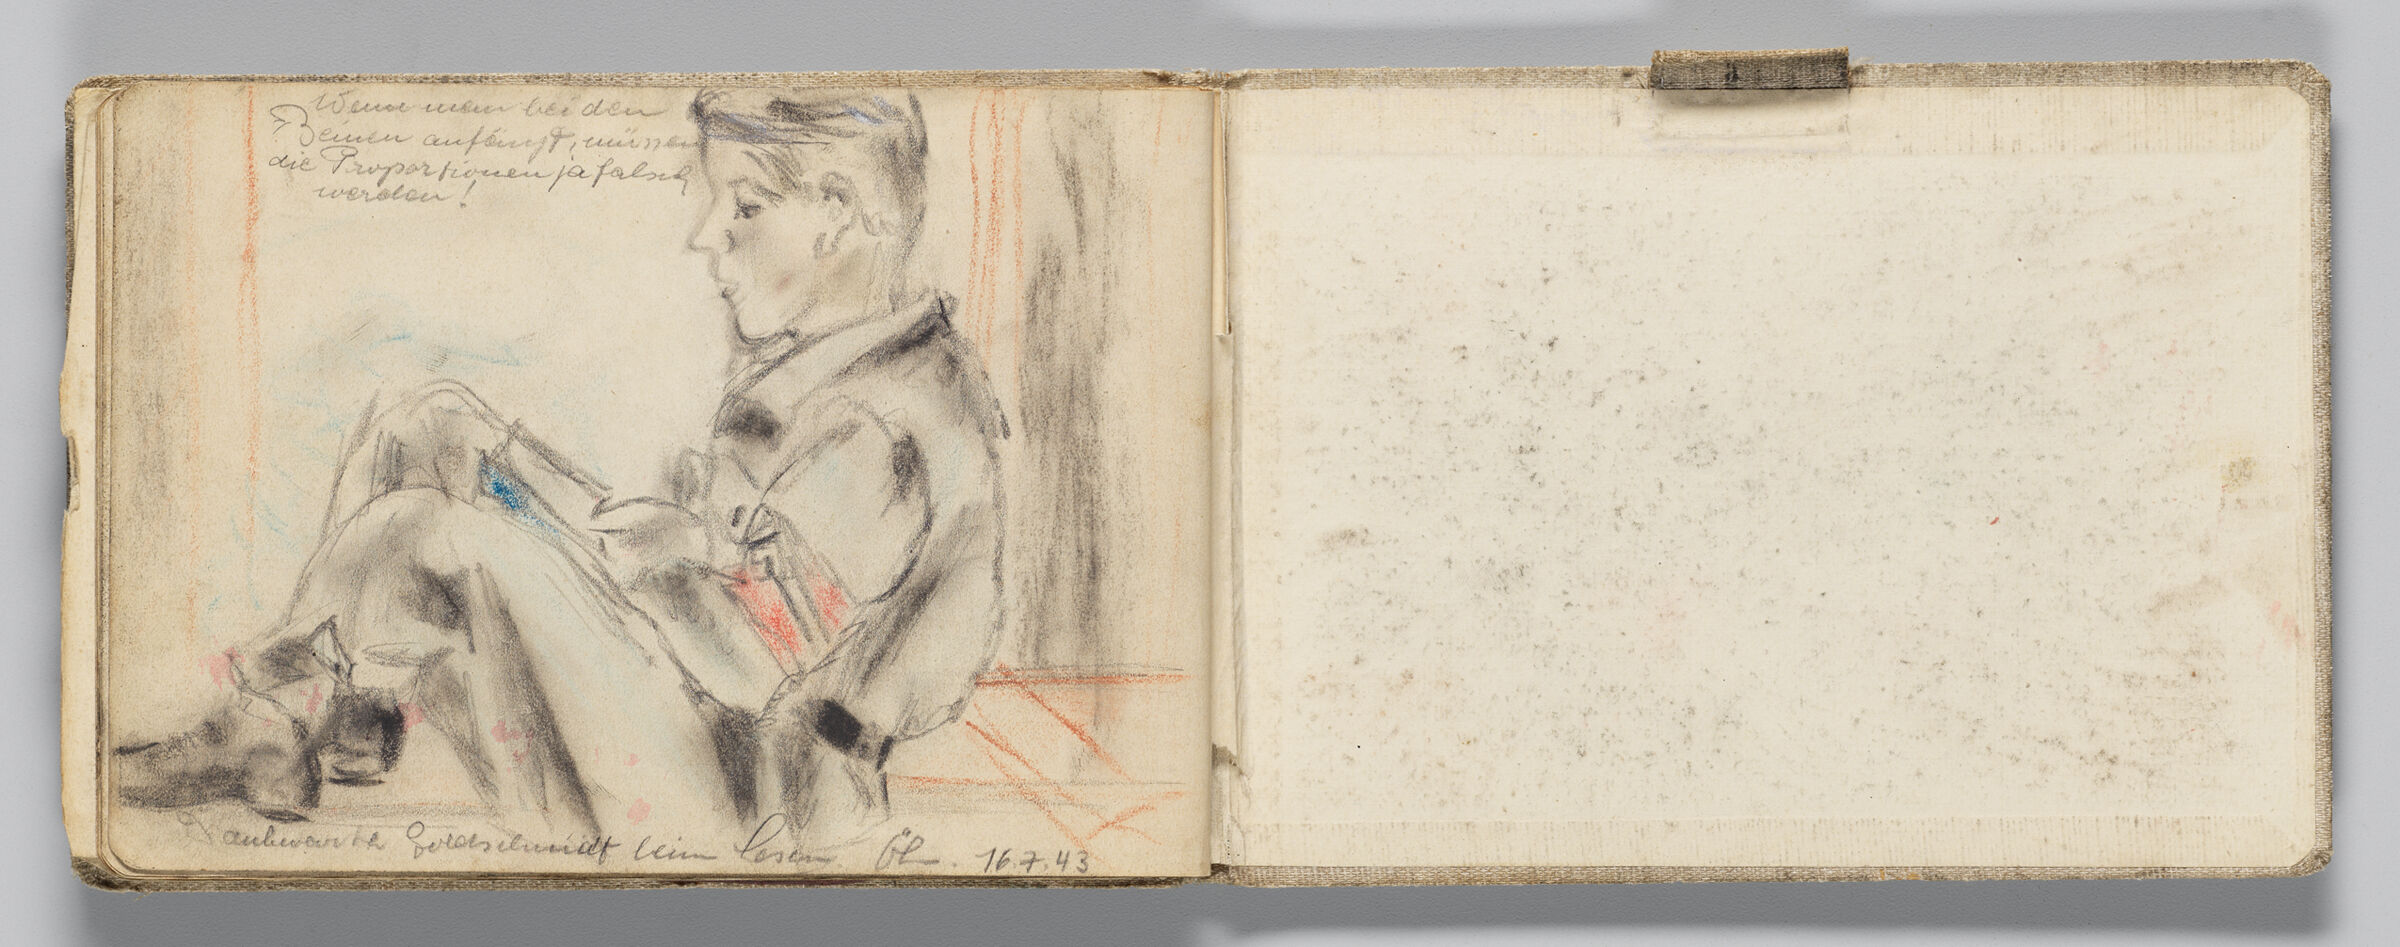 Untitled (Uniformed Hitler Youth Reading, Left Page); Untitled (Back Endpaper With Graphite Traces, Right Page)